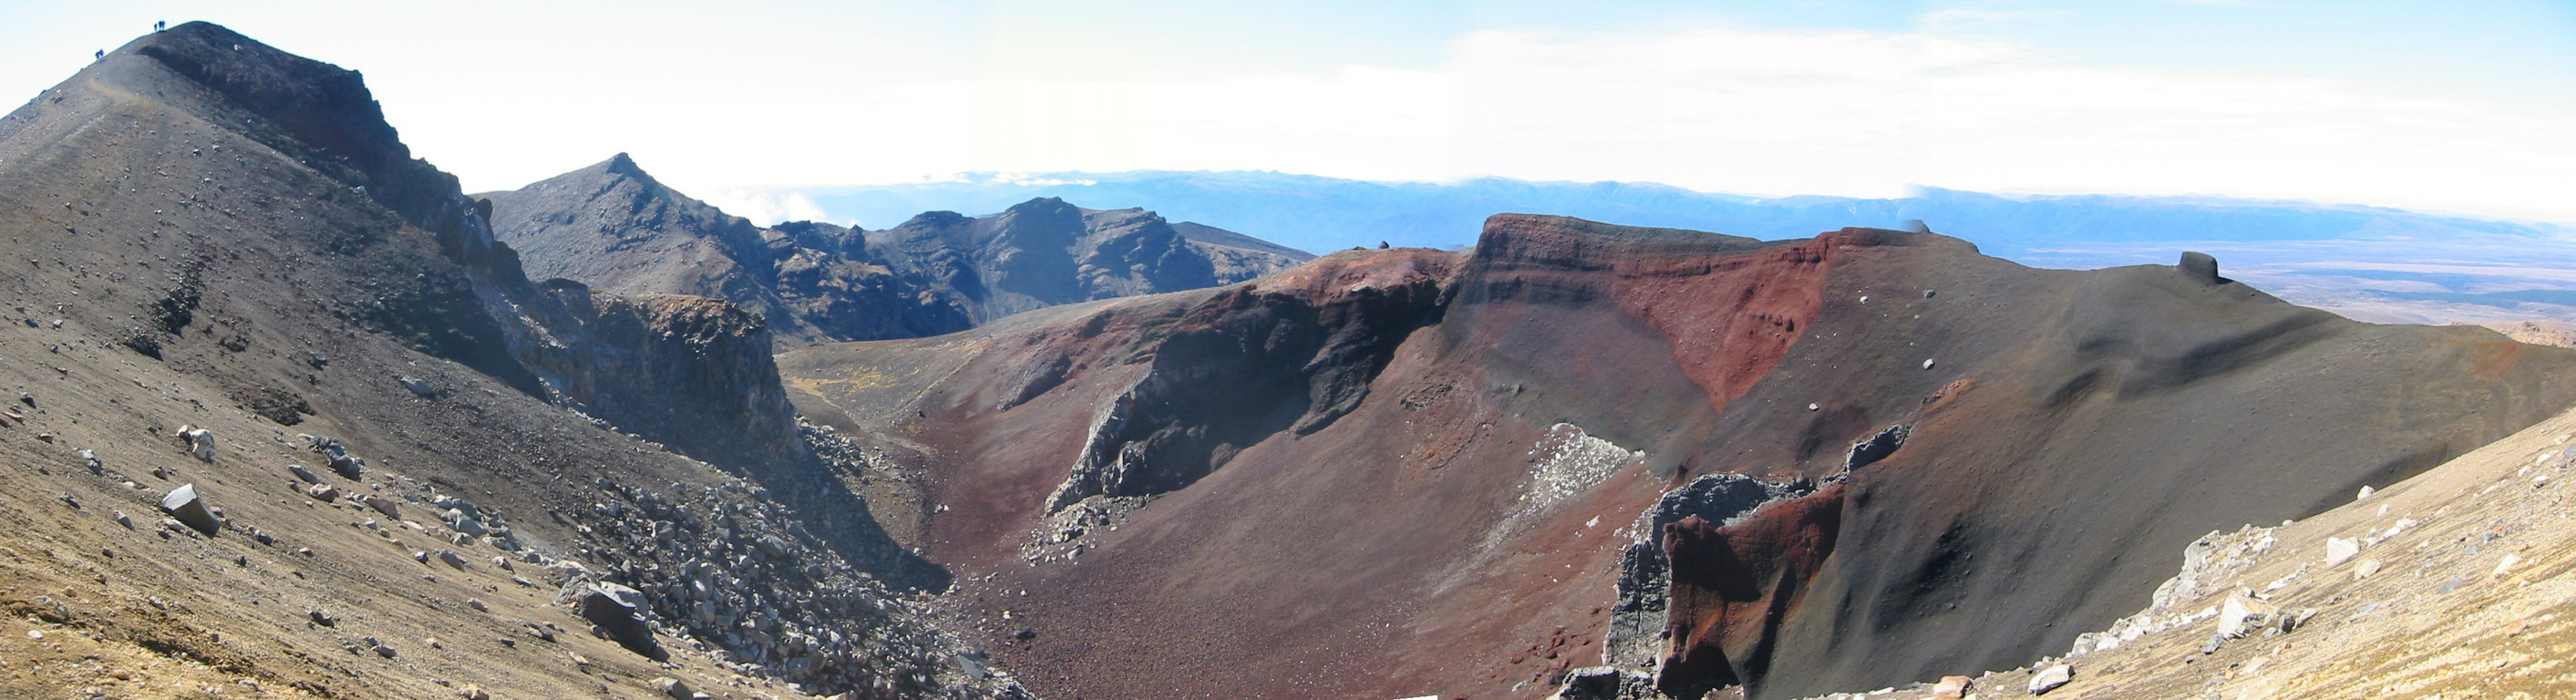 Red Crater panorama - I think the ridge on the left constitutes the highest point of the track